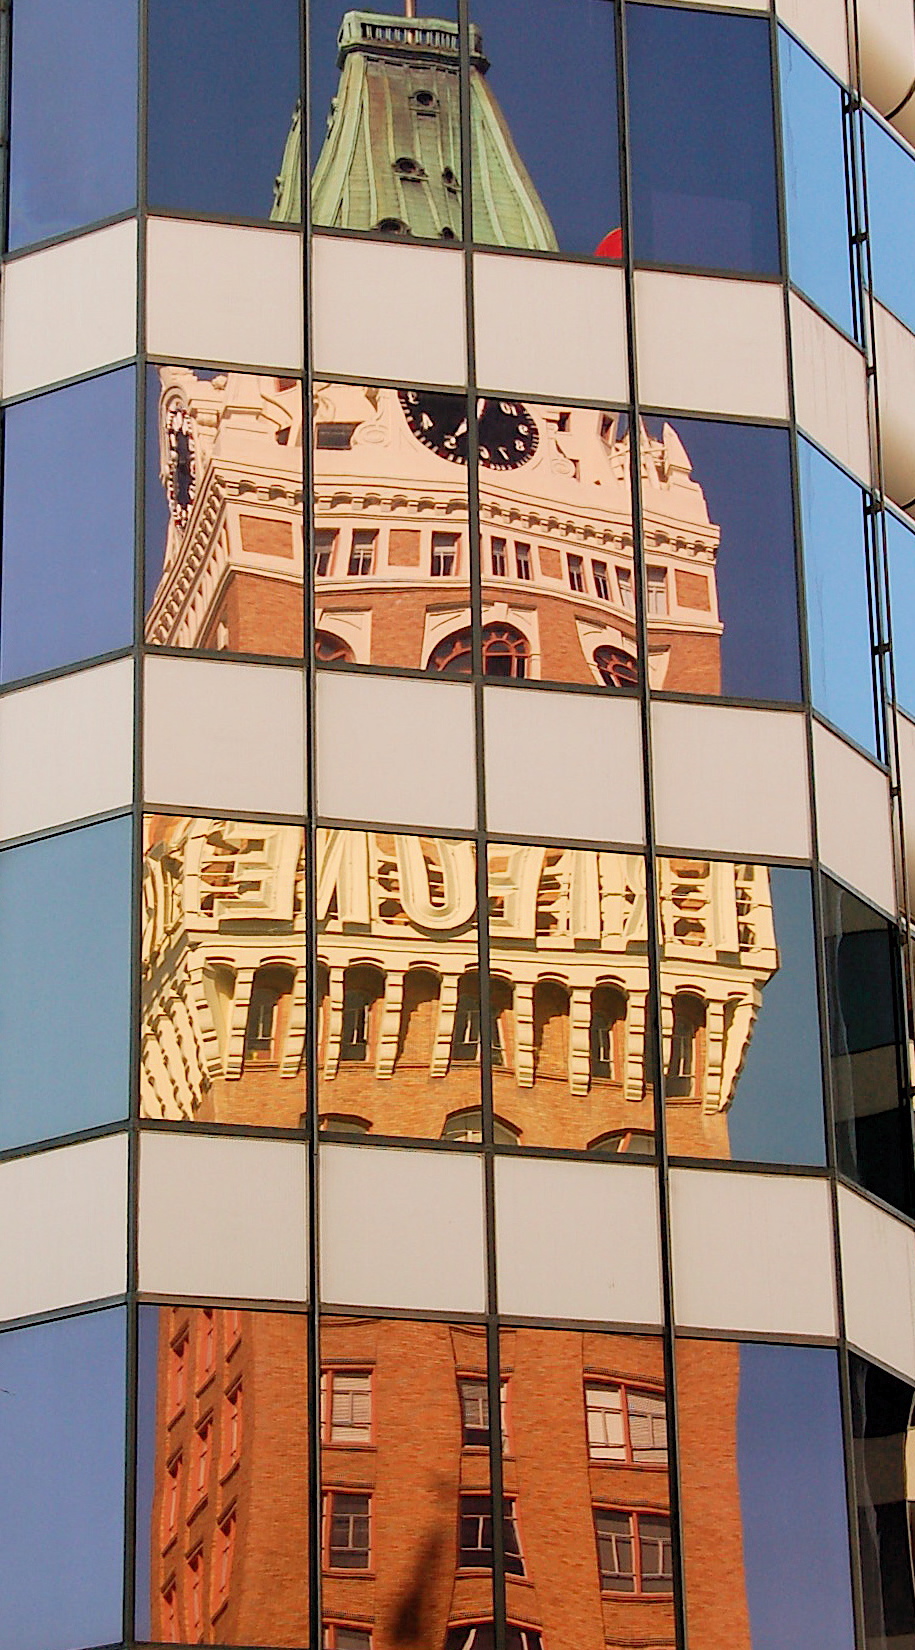 a very large building and clock tower reflected in some buildings windows